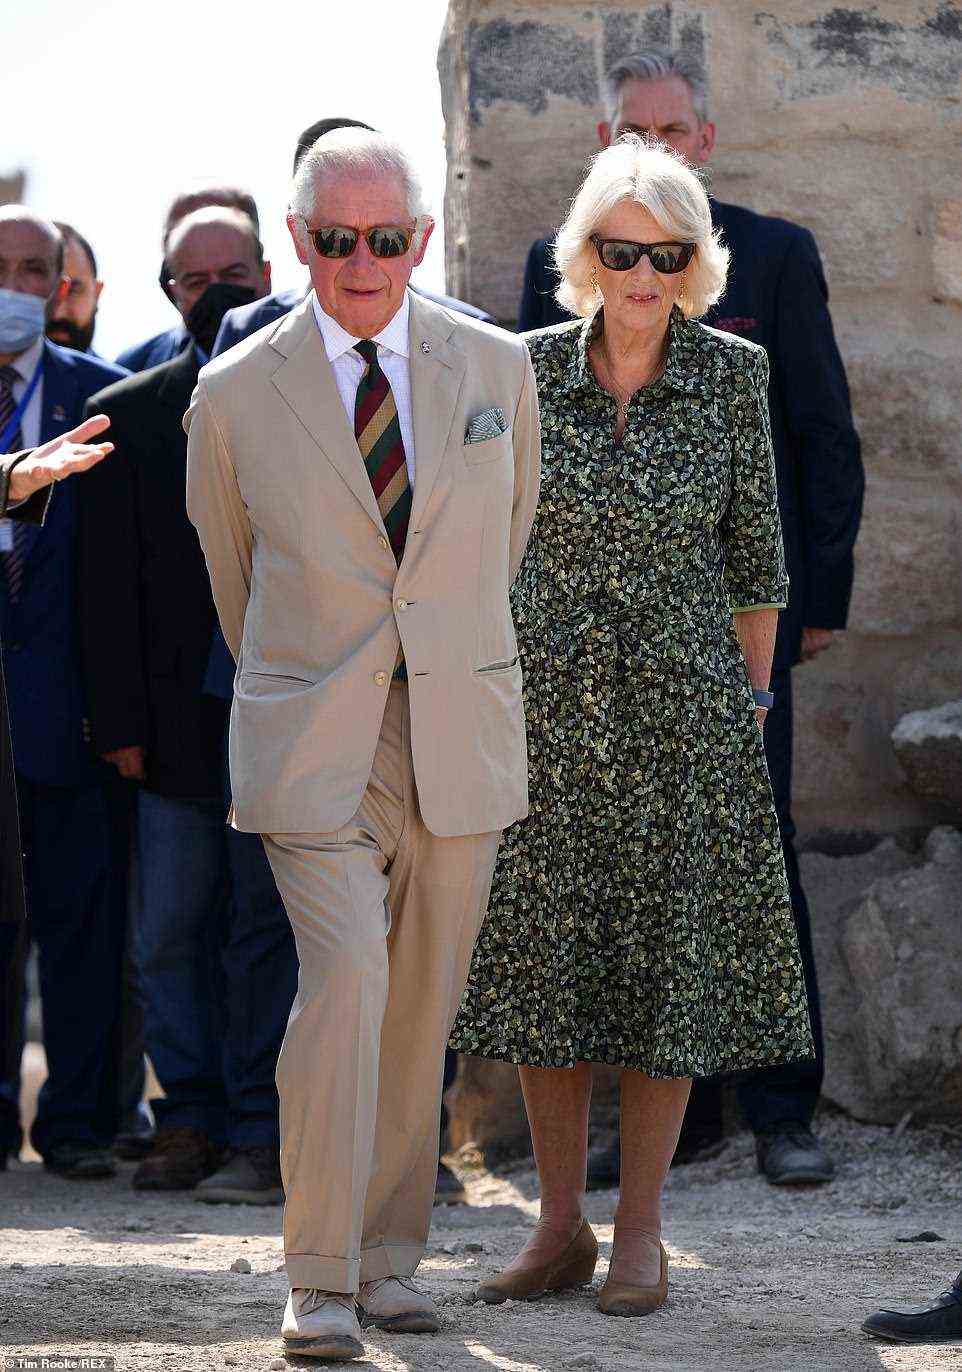 As they wandered the main dusty path through the ruins - one of Jordan's most popular tourist attractions - Charles and Camilla learned about the site's rich tapestry of history including Hellenic, Roman, Byzantine and Early Muslim influences